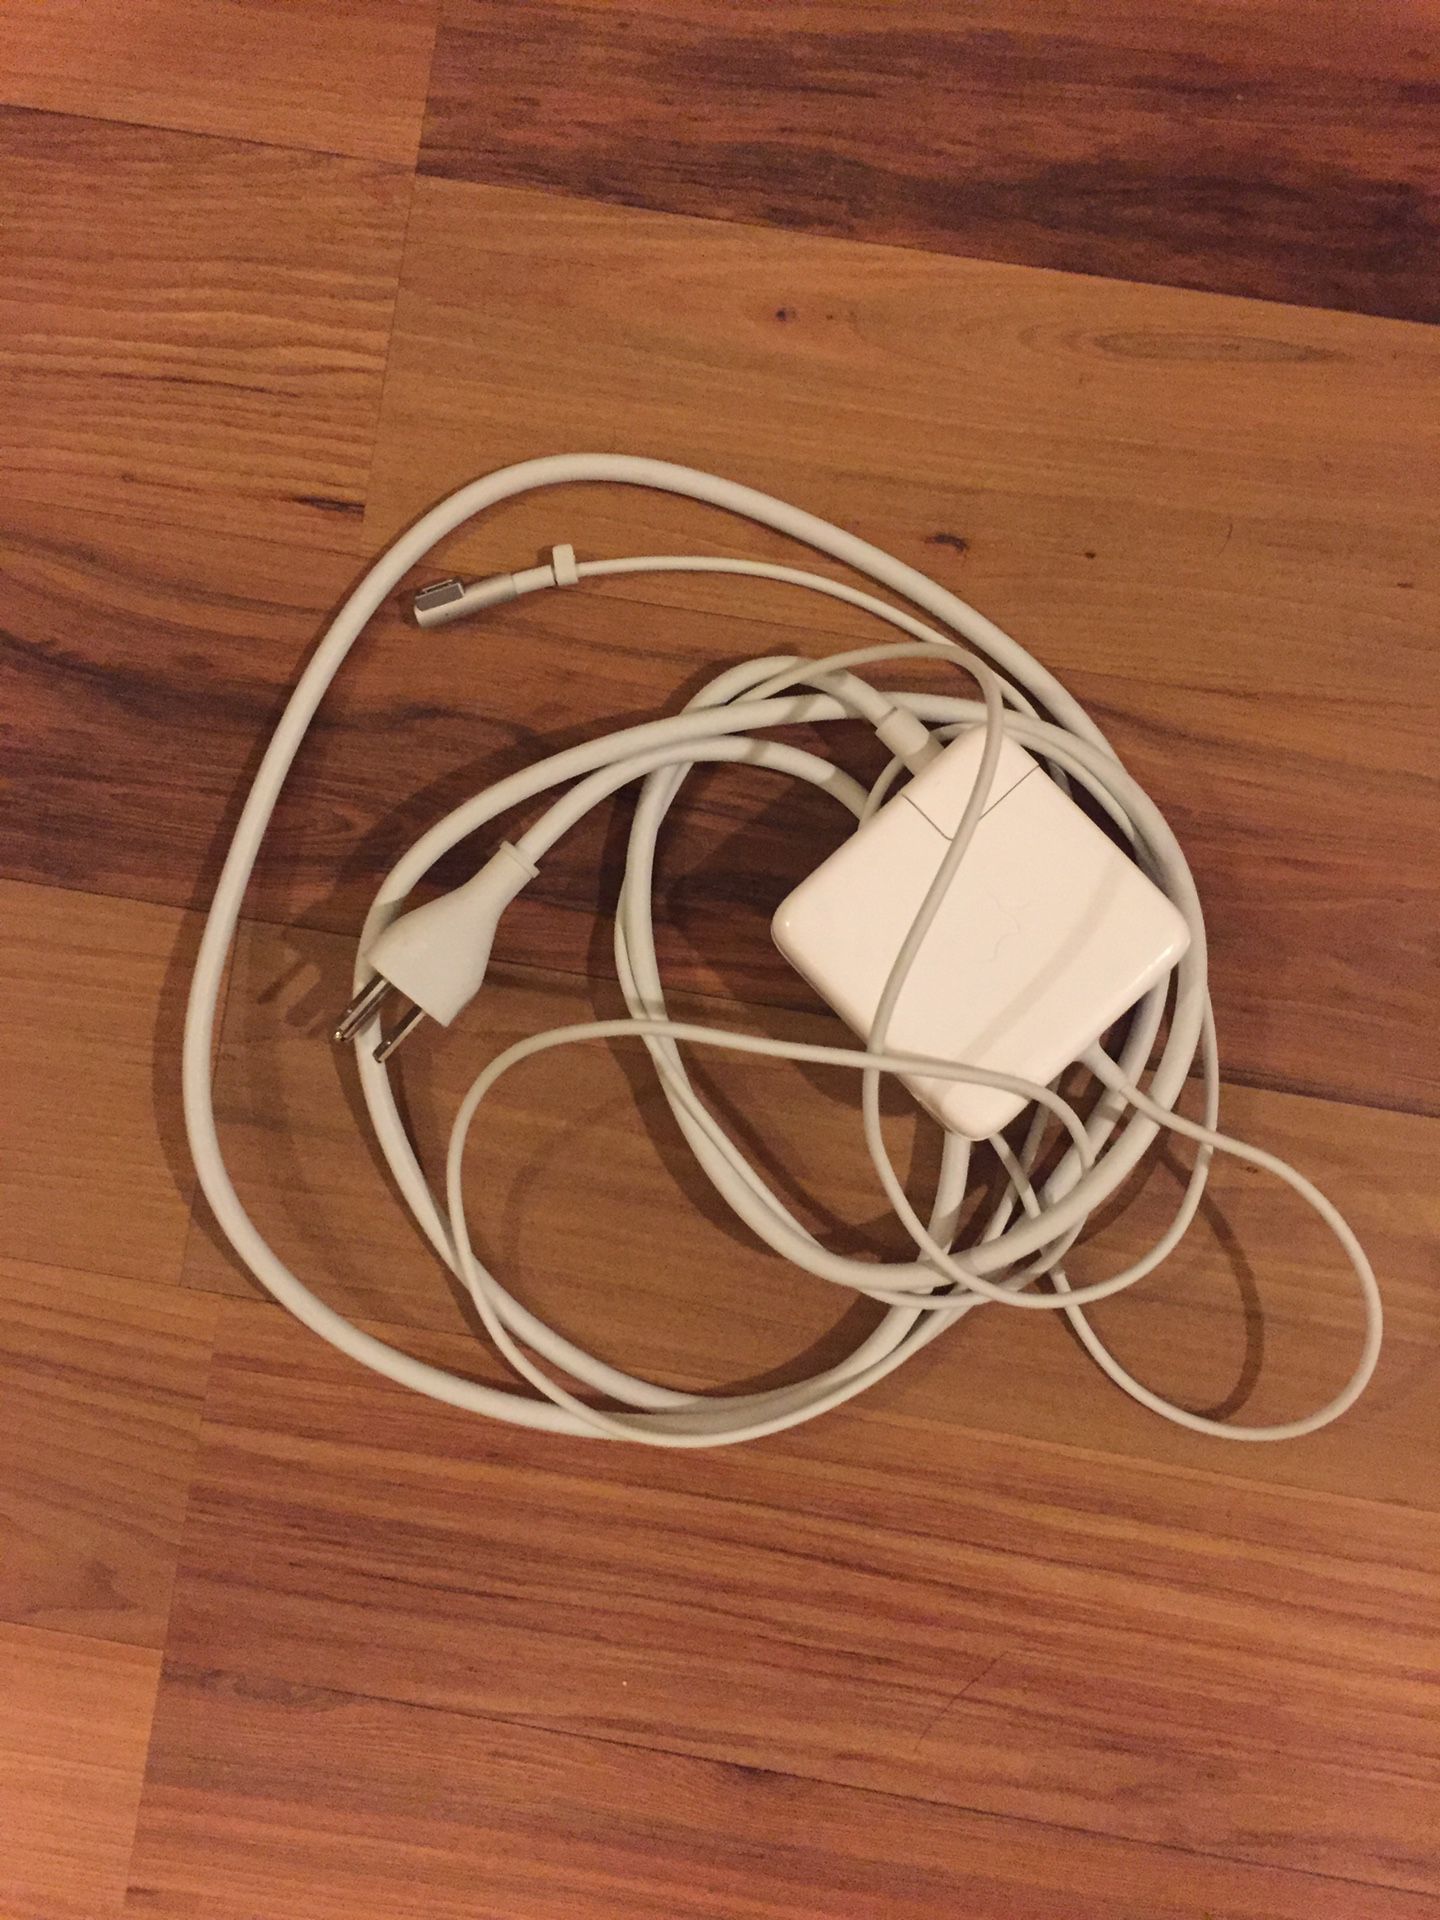 Apple laptop charger